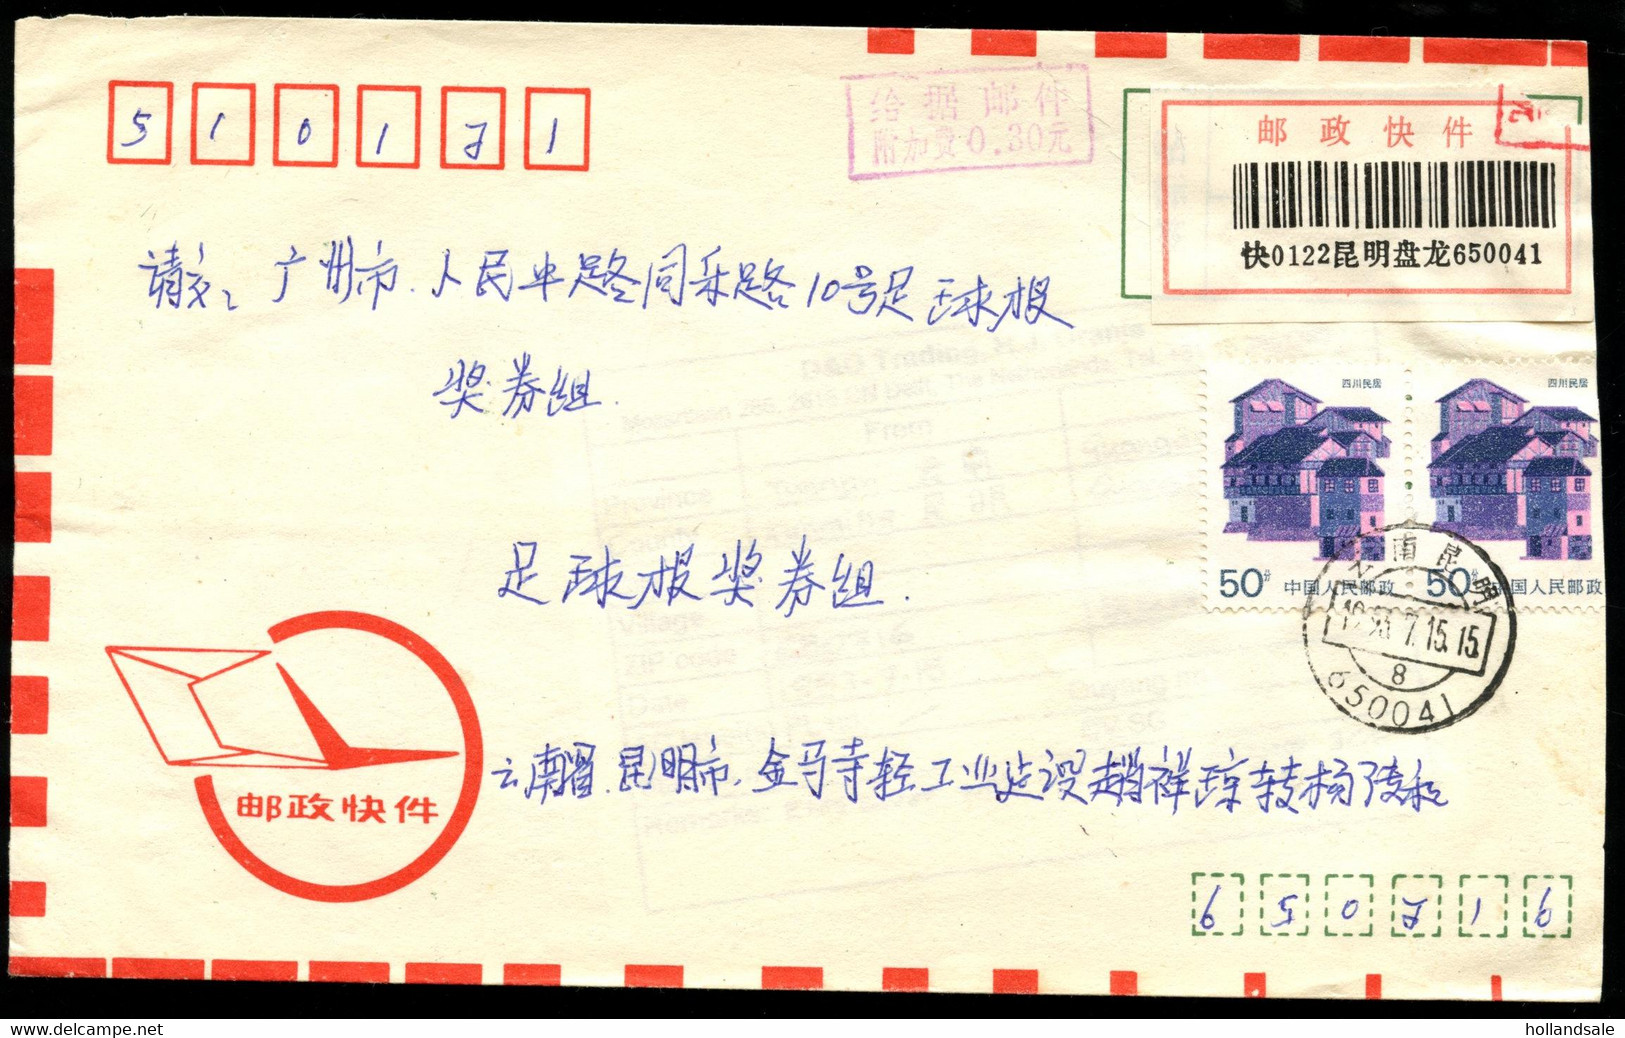 CHINA PRC / ADDED CHARGE LABELS -Letter Sent From Kunming To Guabgzhou. Red-violet AC Chop Of 30f - Postage Due